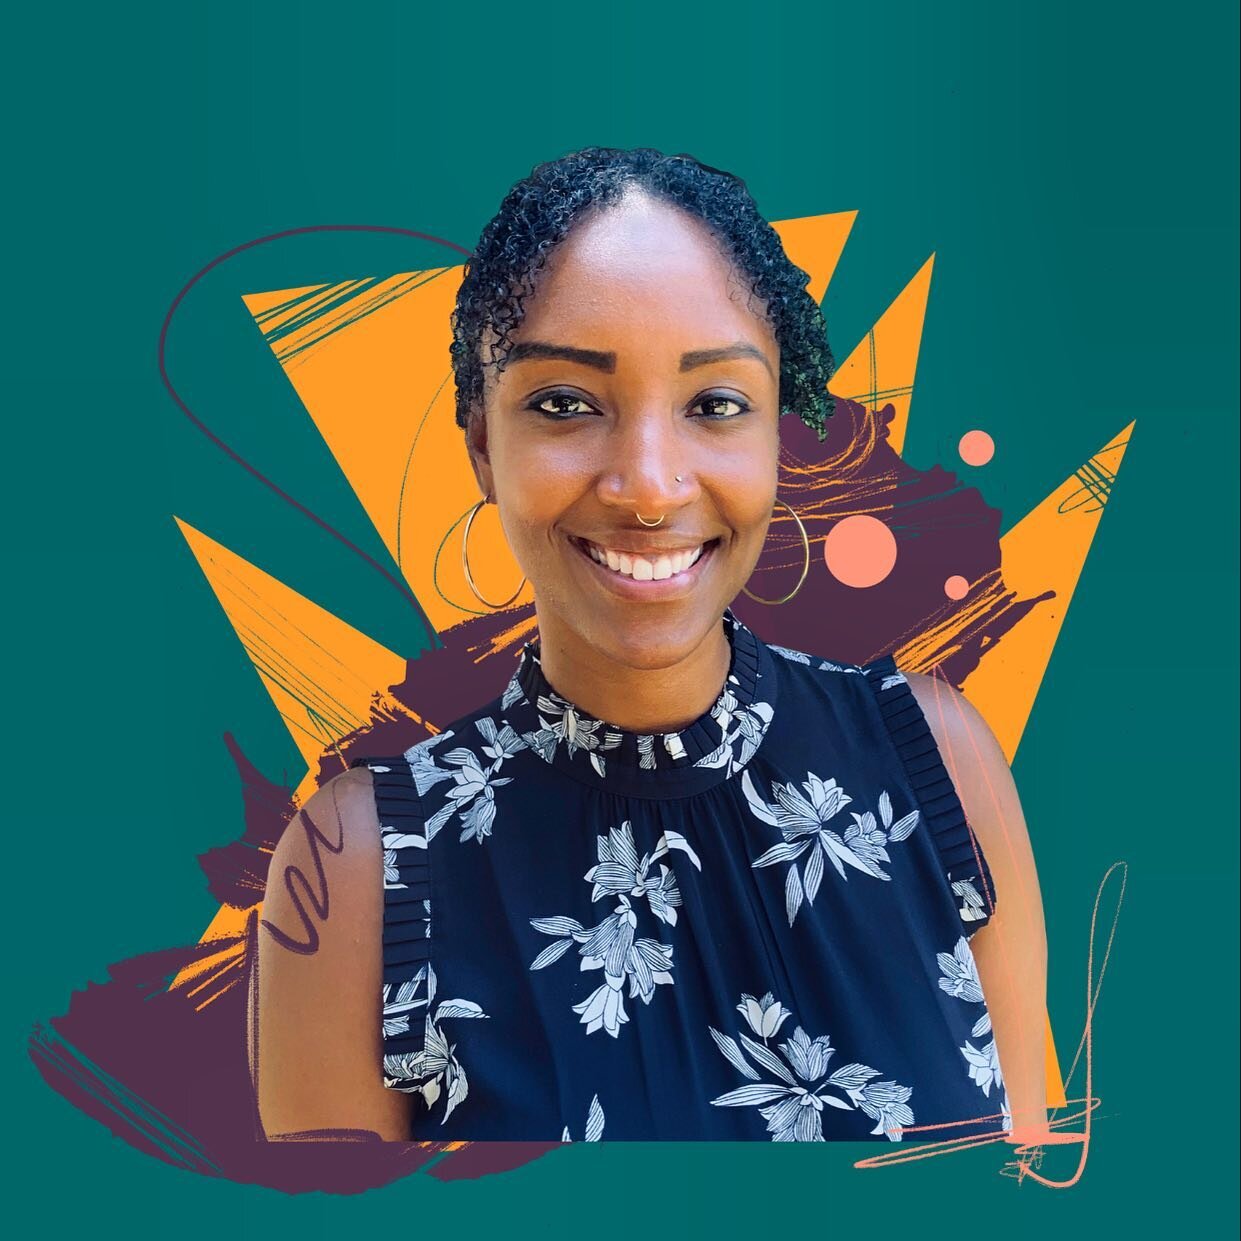 🗣Last and certainly not least another  @roomtobreathe_retreats facilitator Kenly Brown, PhD! Kenly will be working with us to cultivate seeds of transformation in ourselves and our workplaces
🙌🏾
Kenly is a postdoctoral fellow at Washington Univers